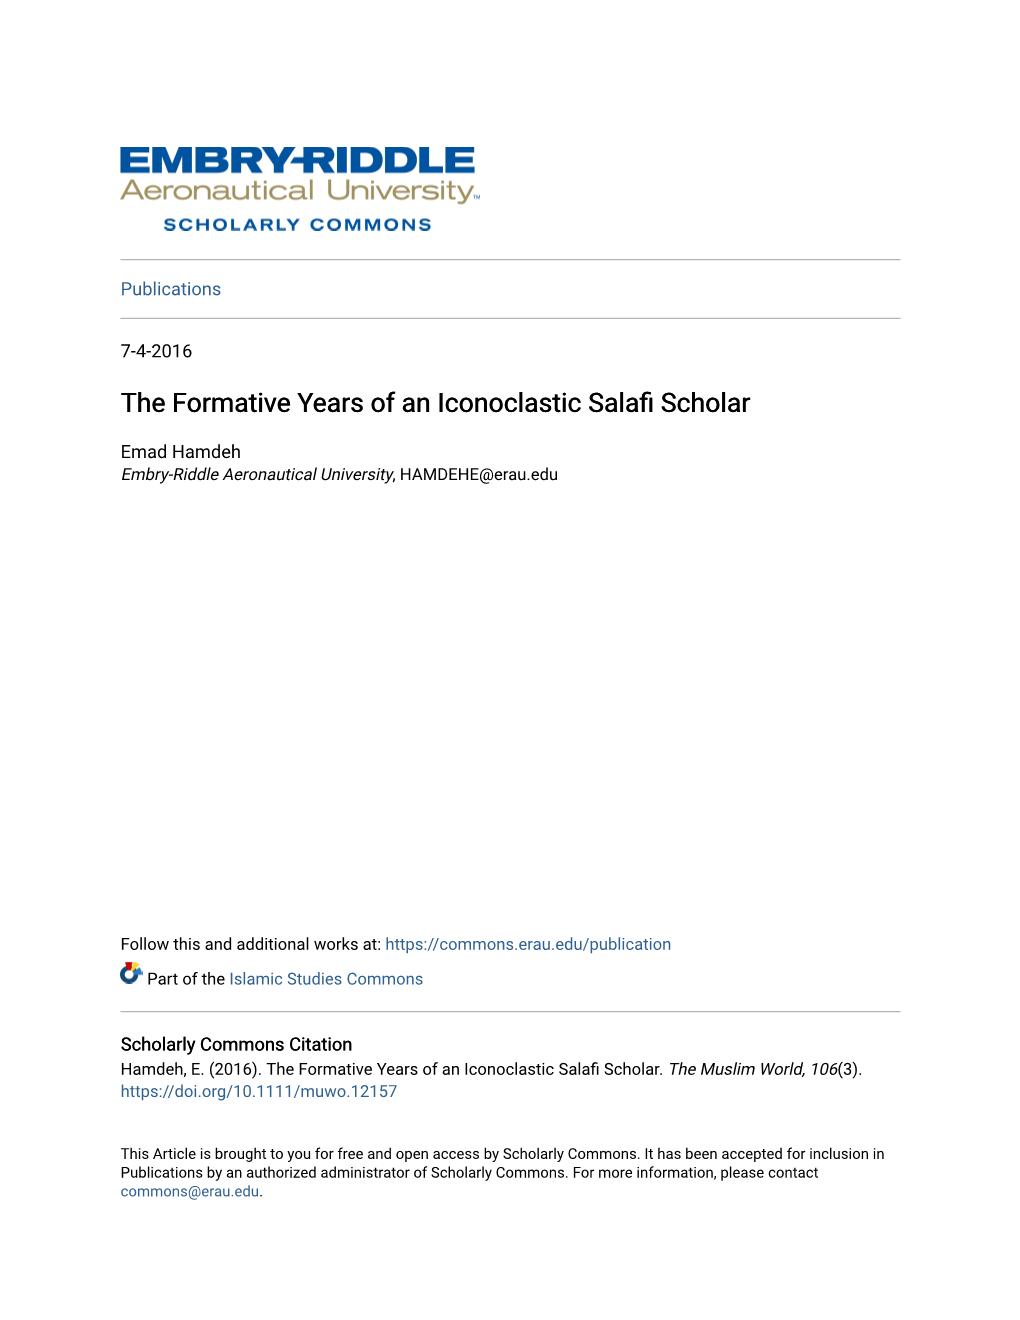 The Formative Years of an Iconoclastic Salafi Scholar